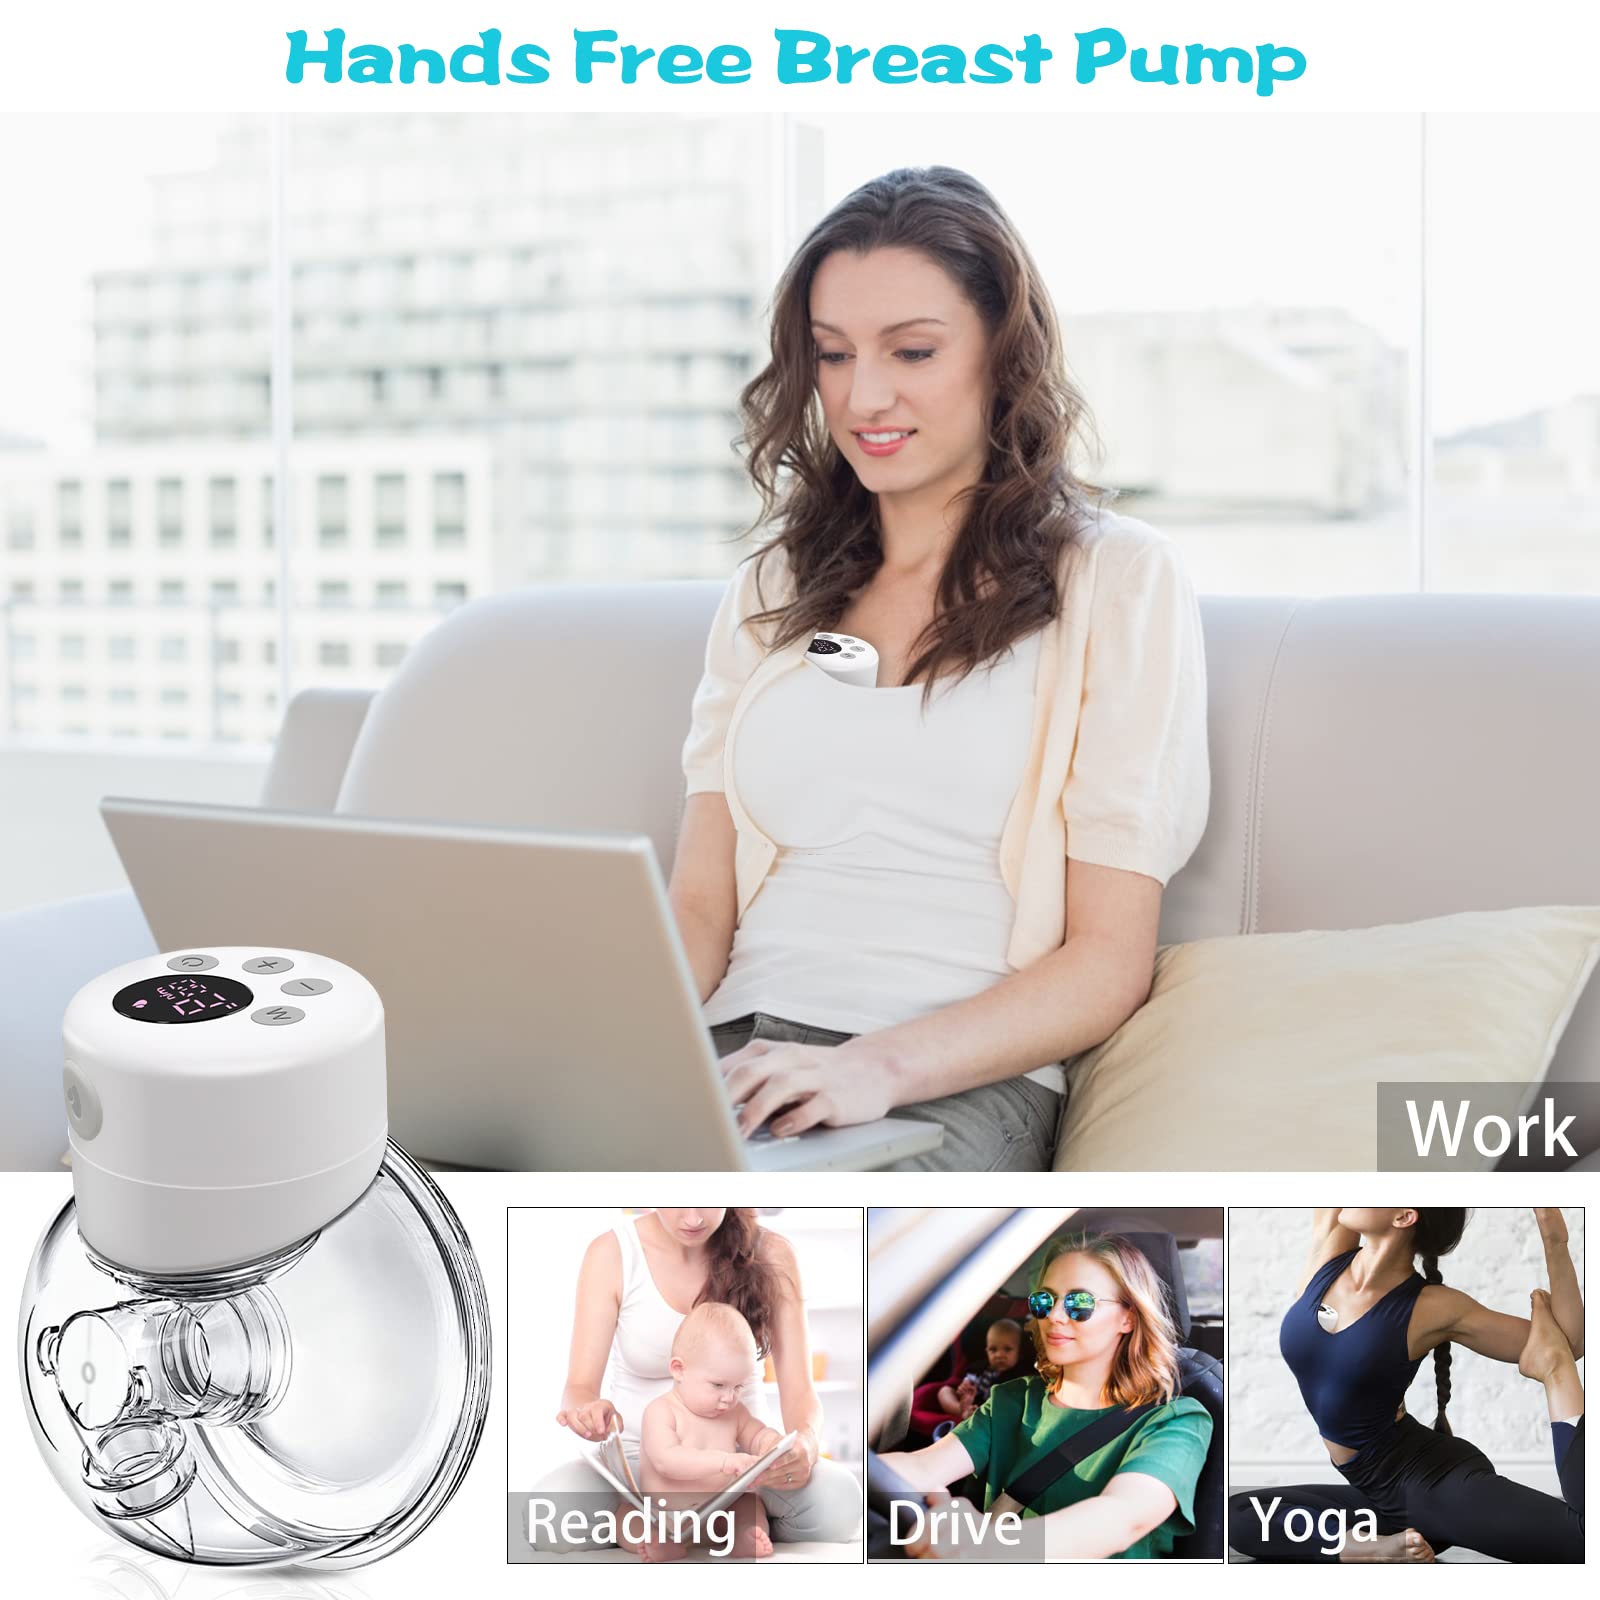 Double Wearable Breast Pump,Hands Free Breast Pump with LCD Display, 2 Modes & 9 Levels of Suction, Memory Function, Hands Free Painless,Portable Breast Pump,24mm Flange